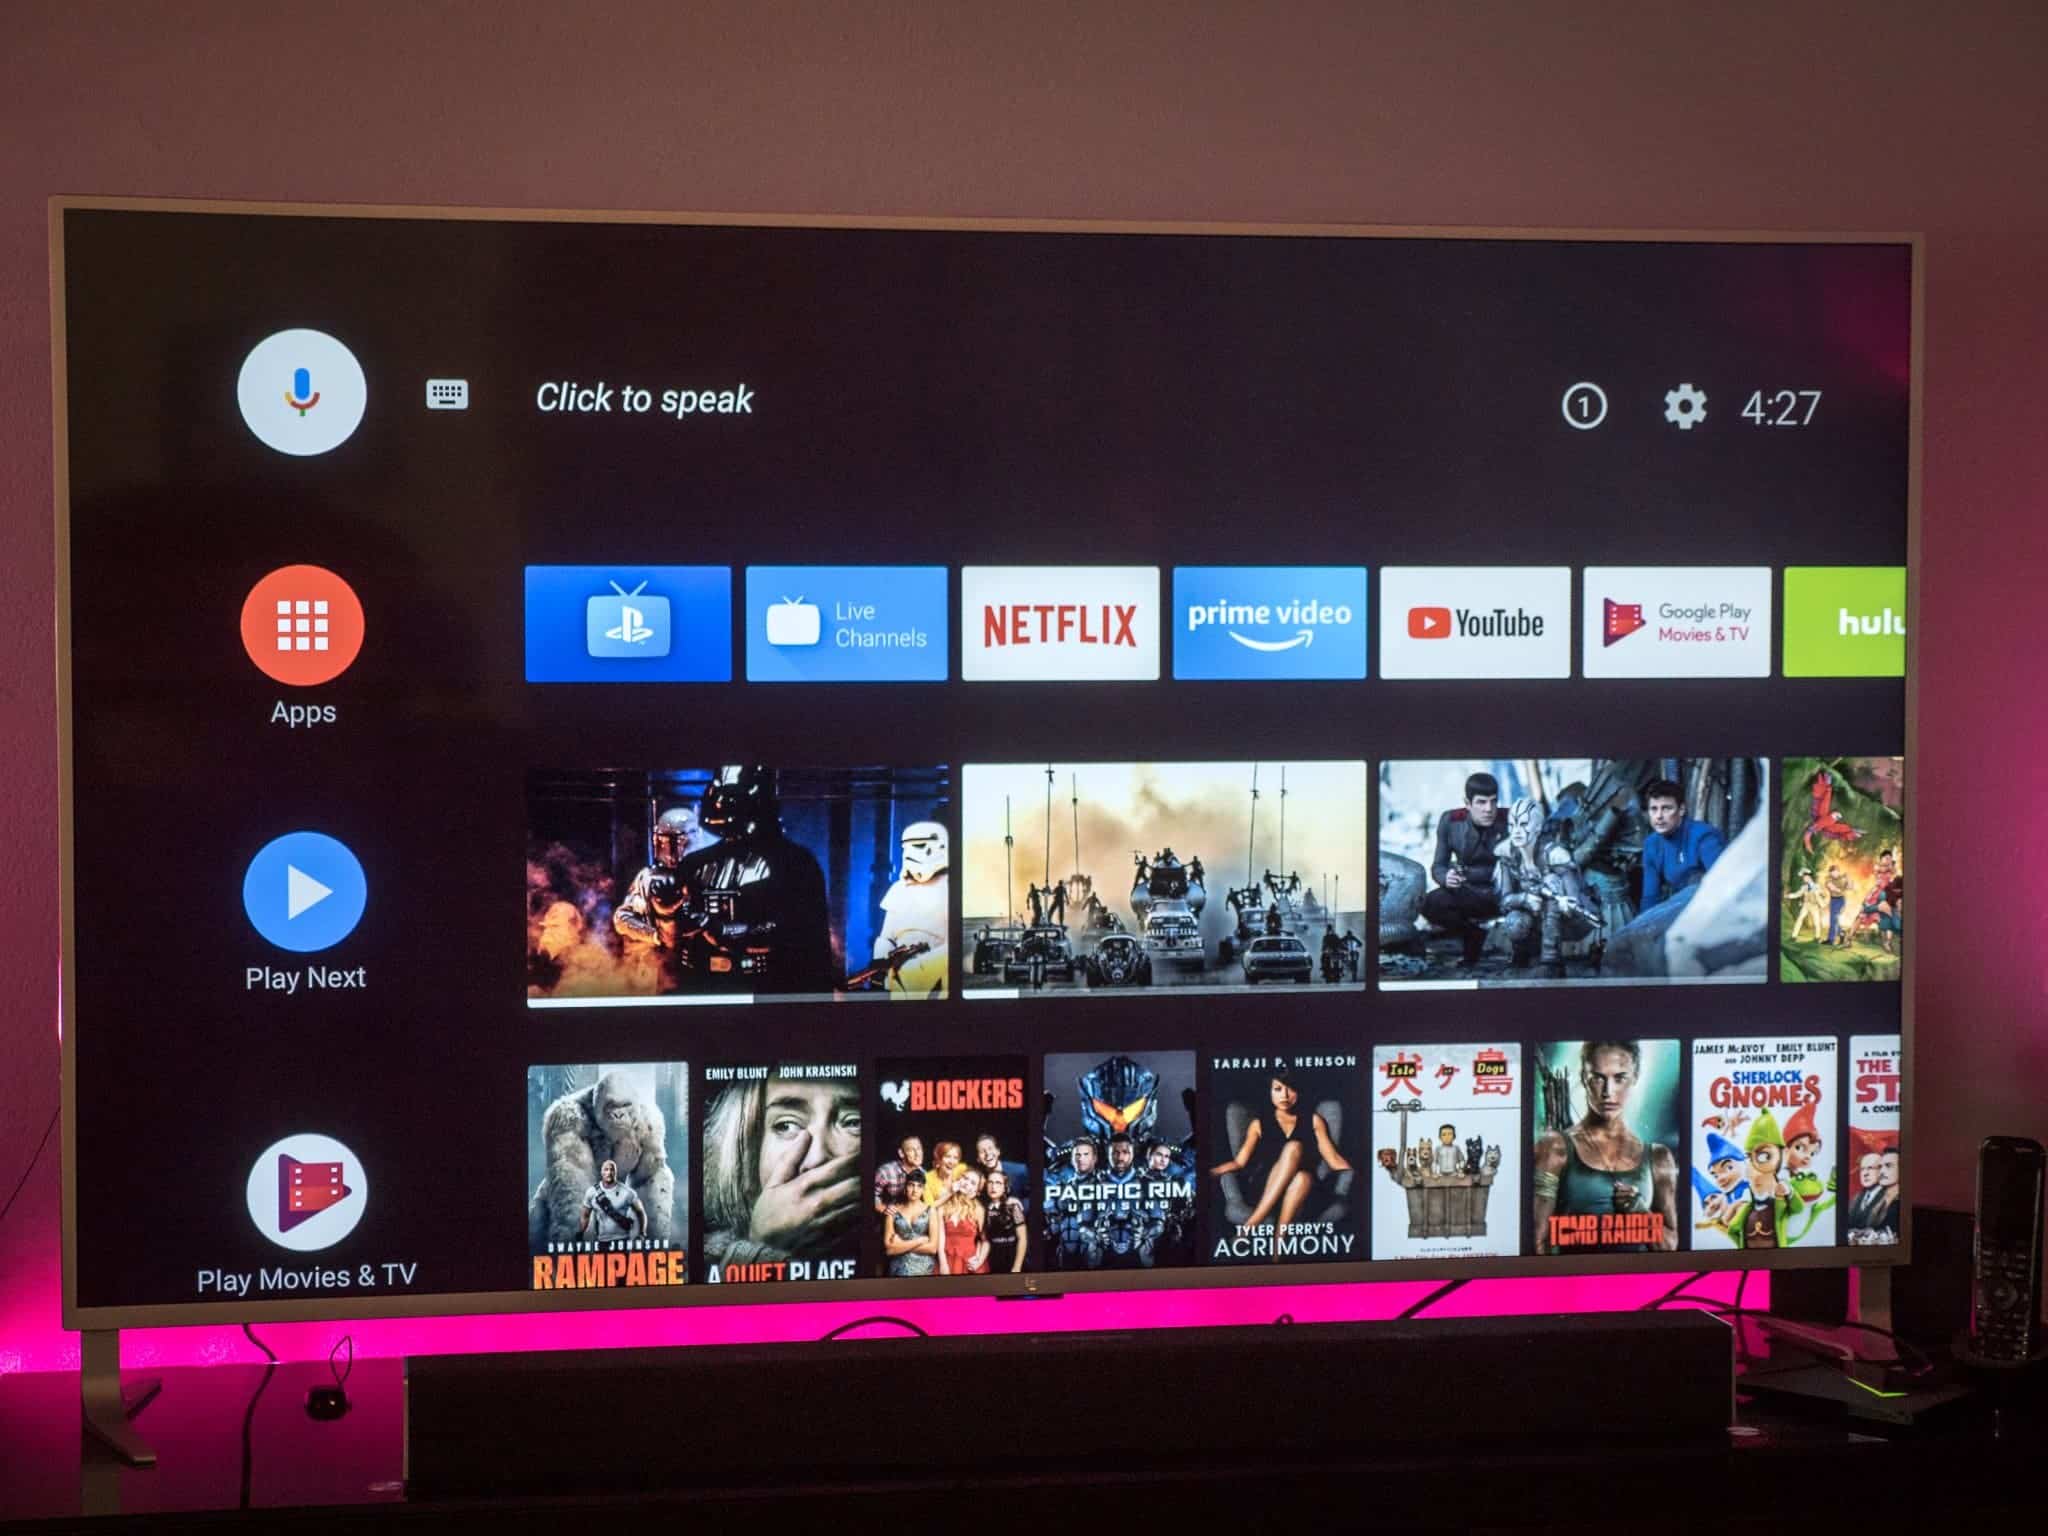 Google Skips Android 13 for Android TV 14 Beta